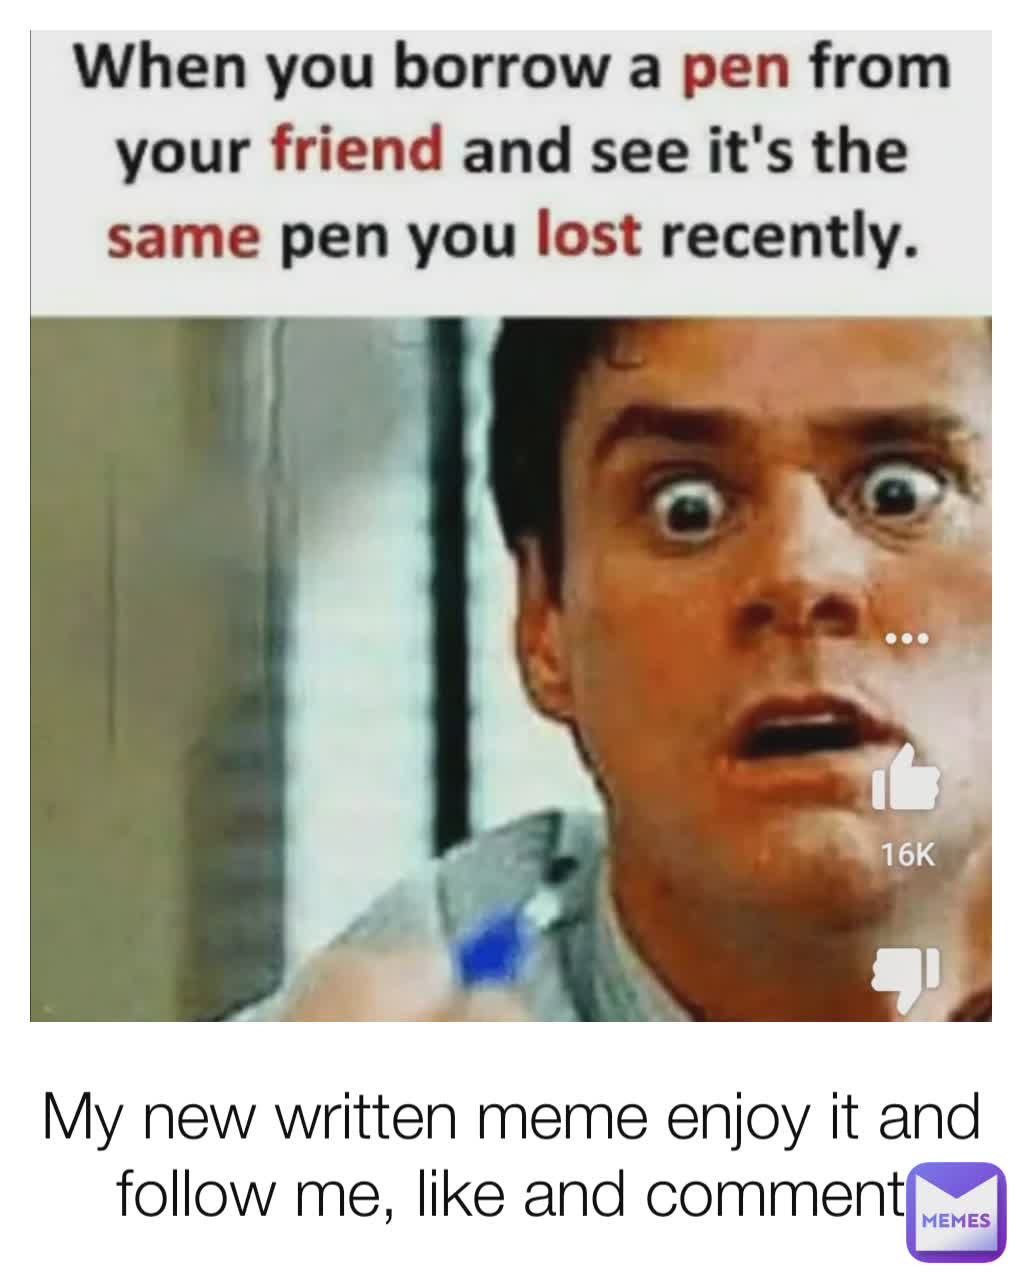 My new written meme enjoy it and follow me, like and comment